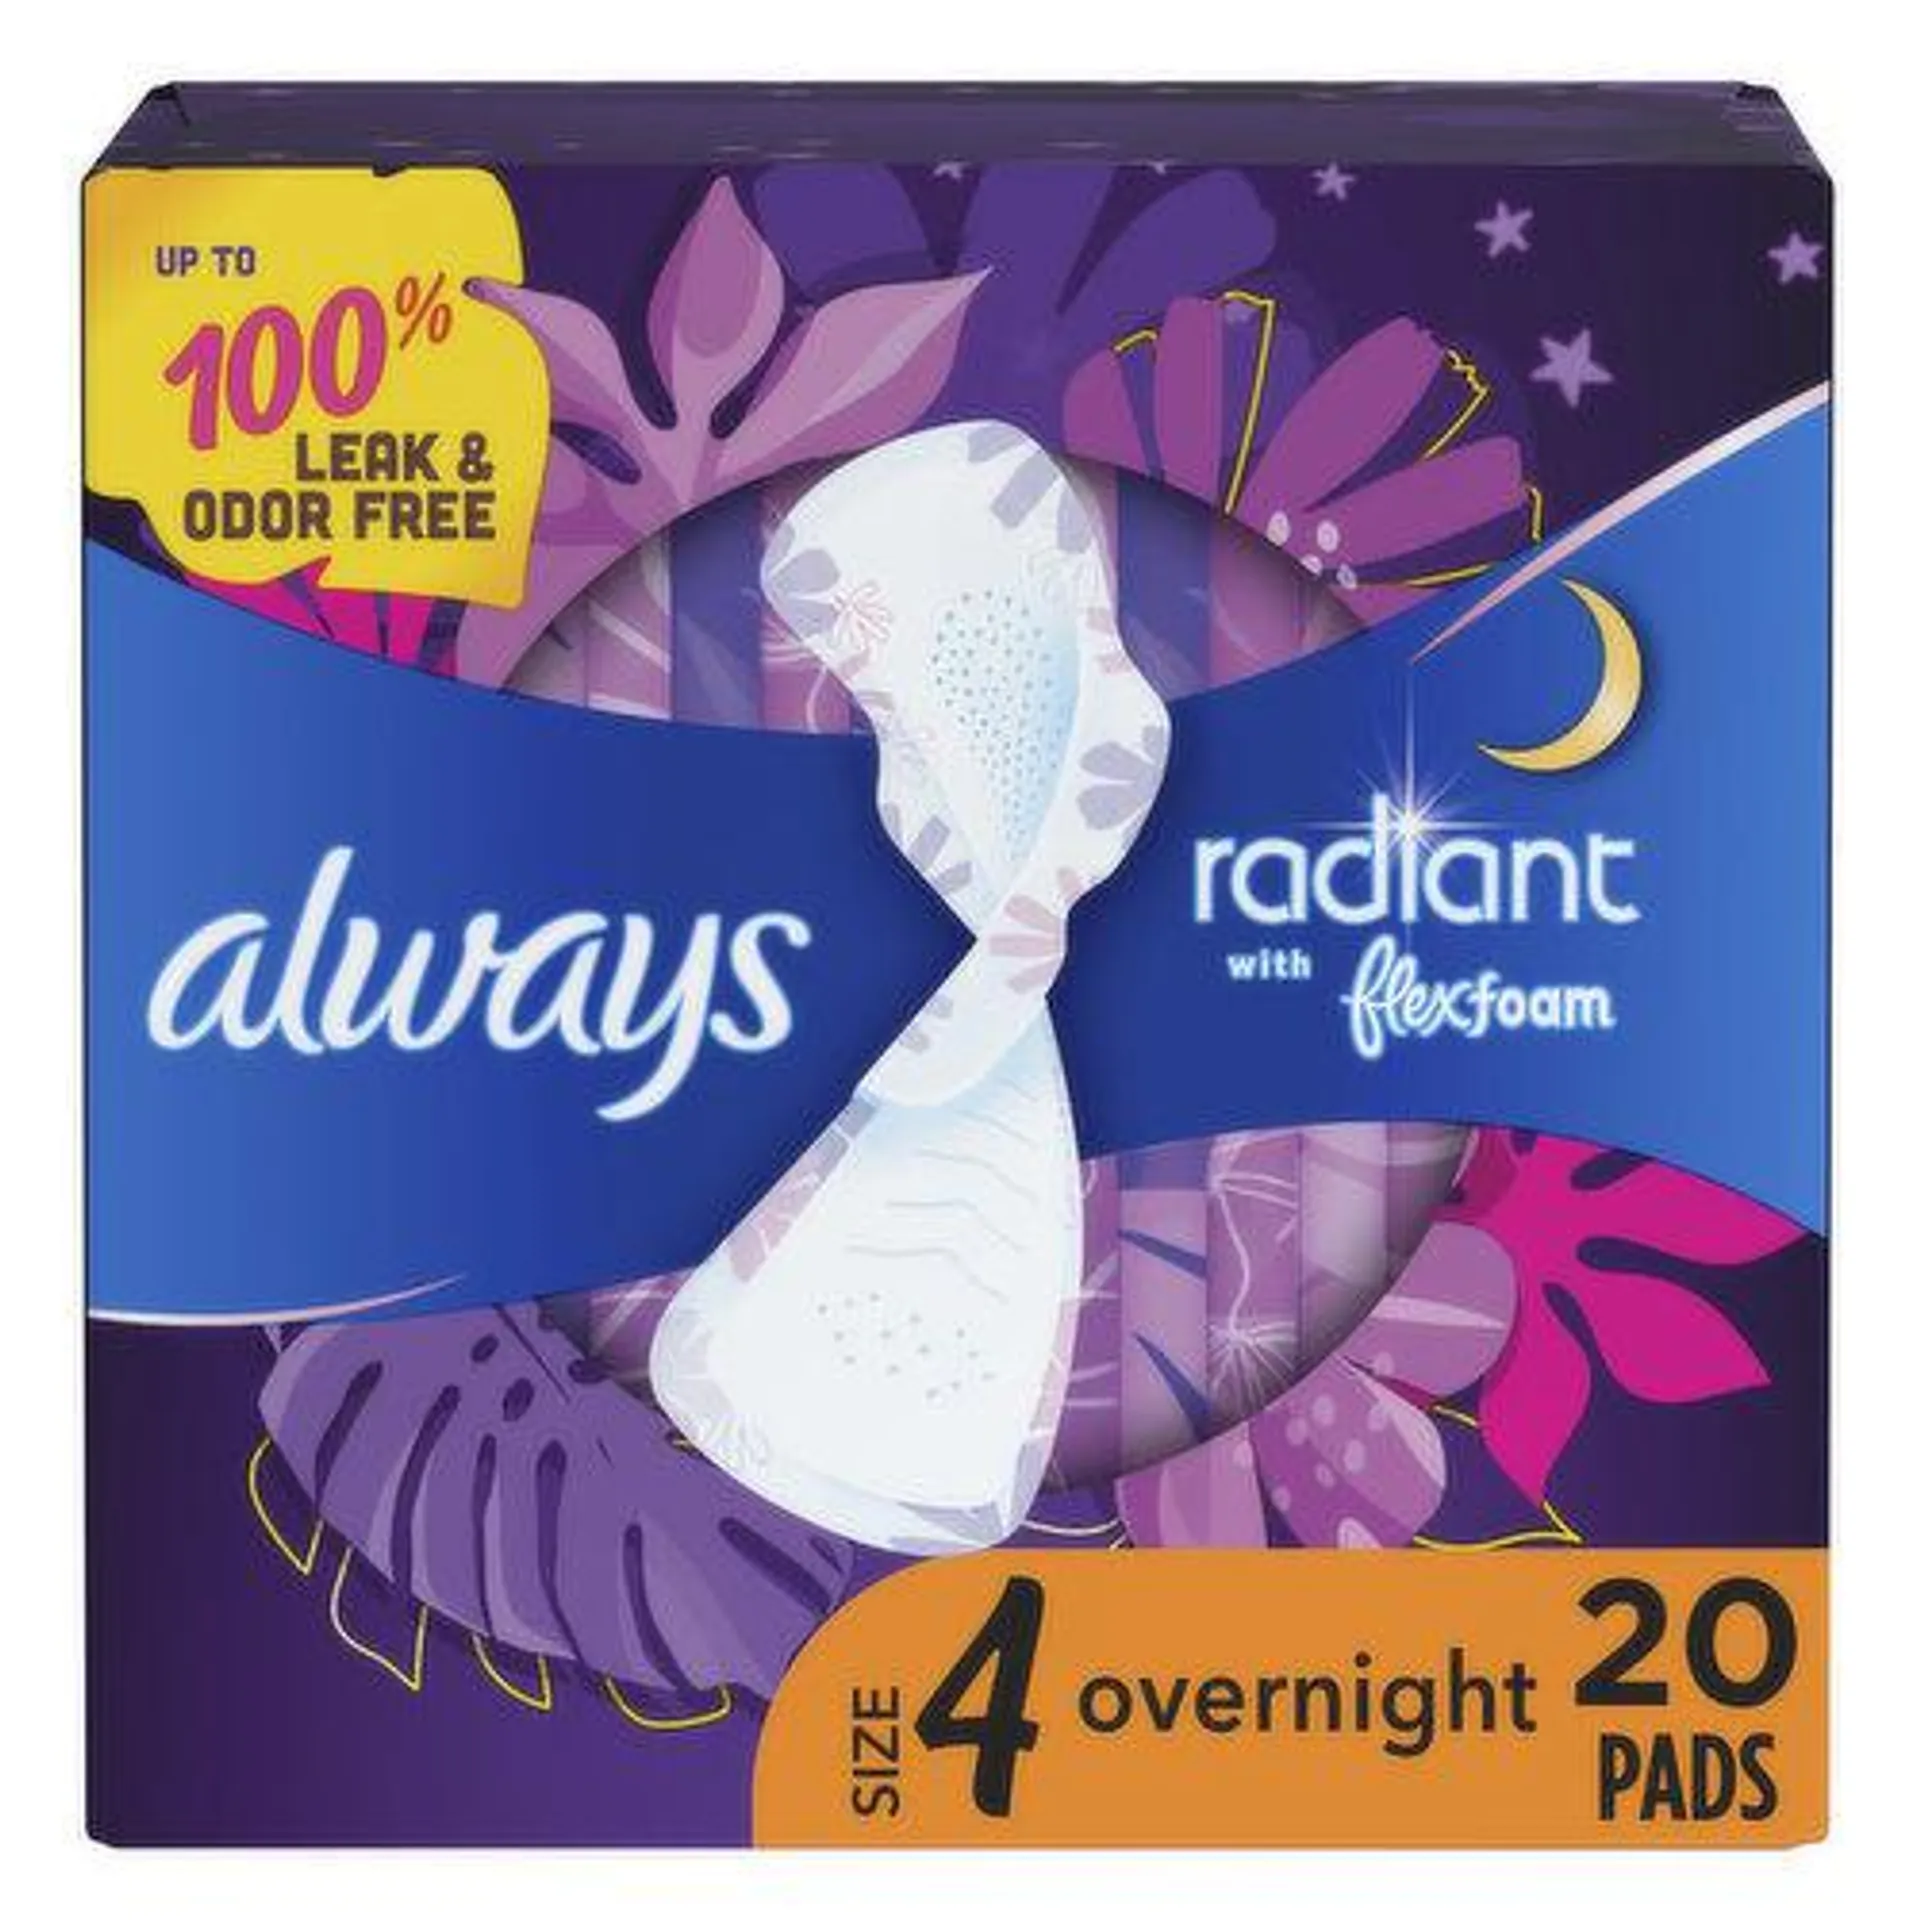 Always Radiant Always Radiant Overnight Pads, Size 4, 20 CT, 20 Each